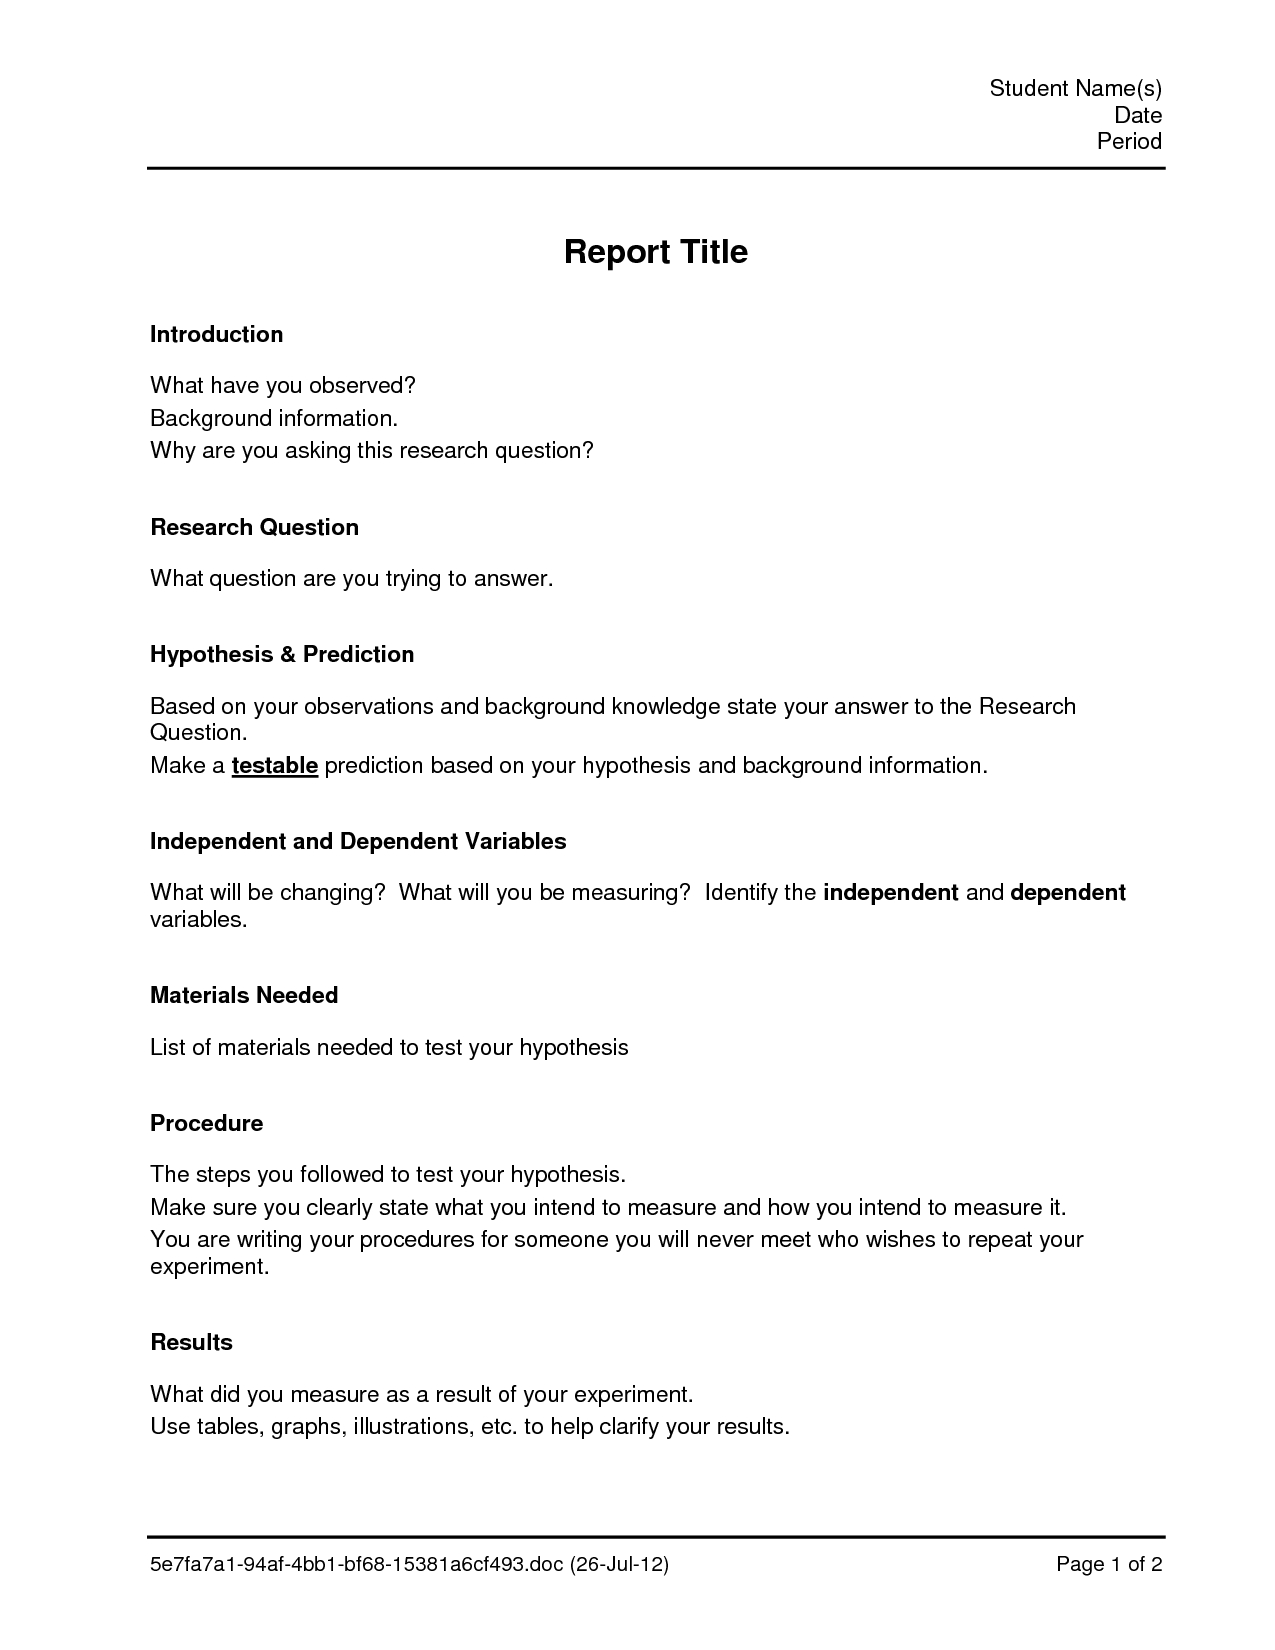 Lab Report Template | E Commercewordpress Within Lab Report Template Word